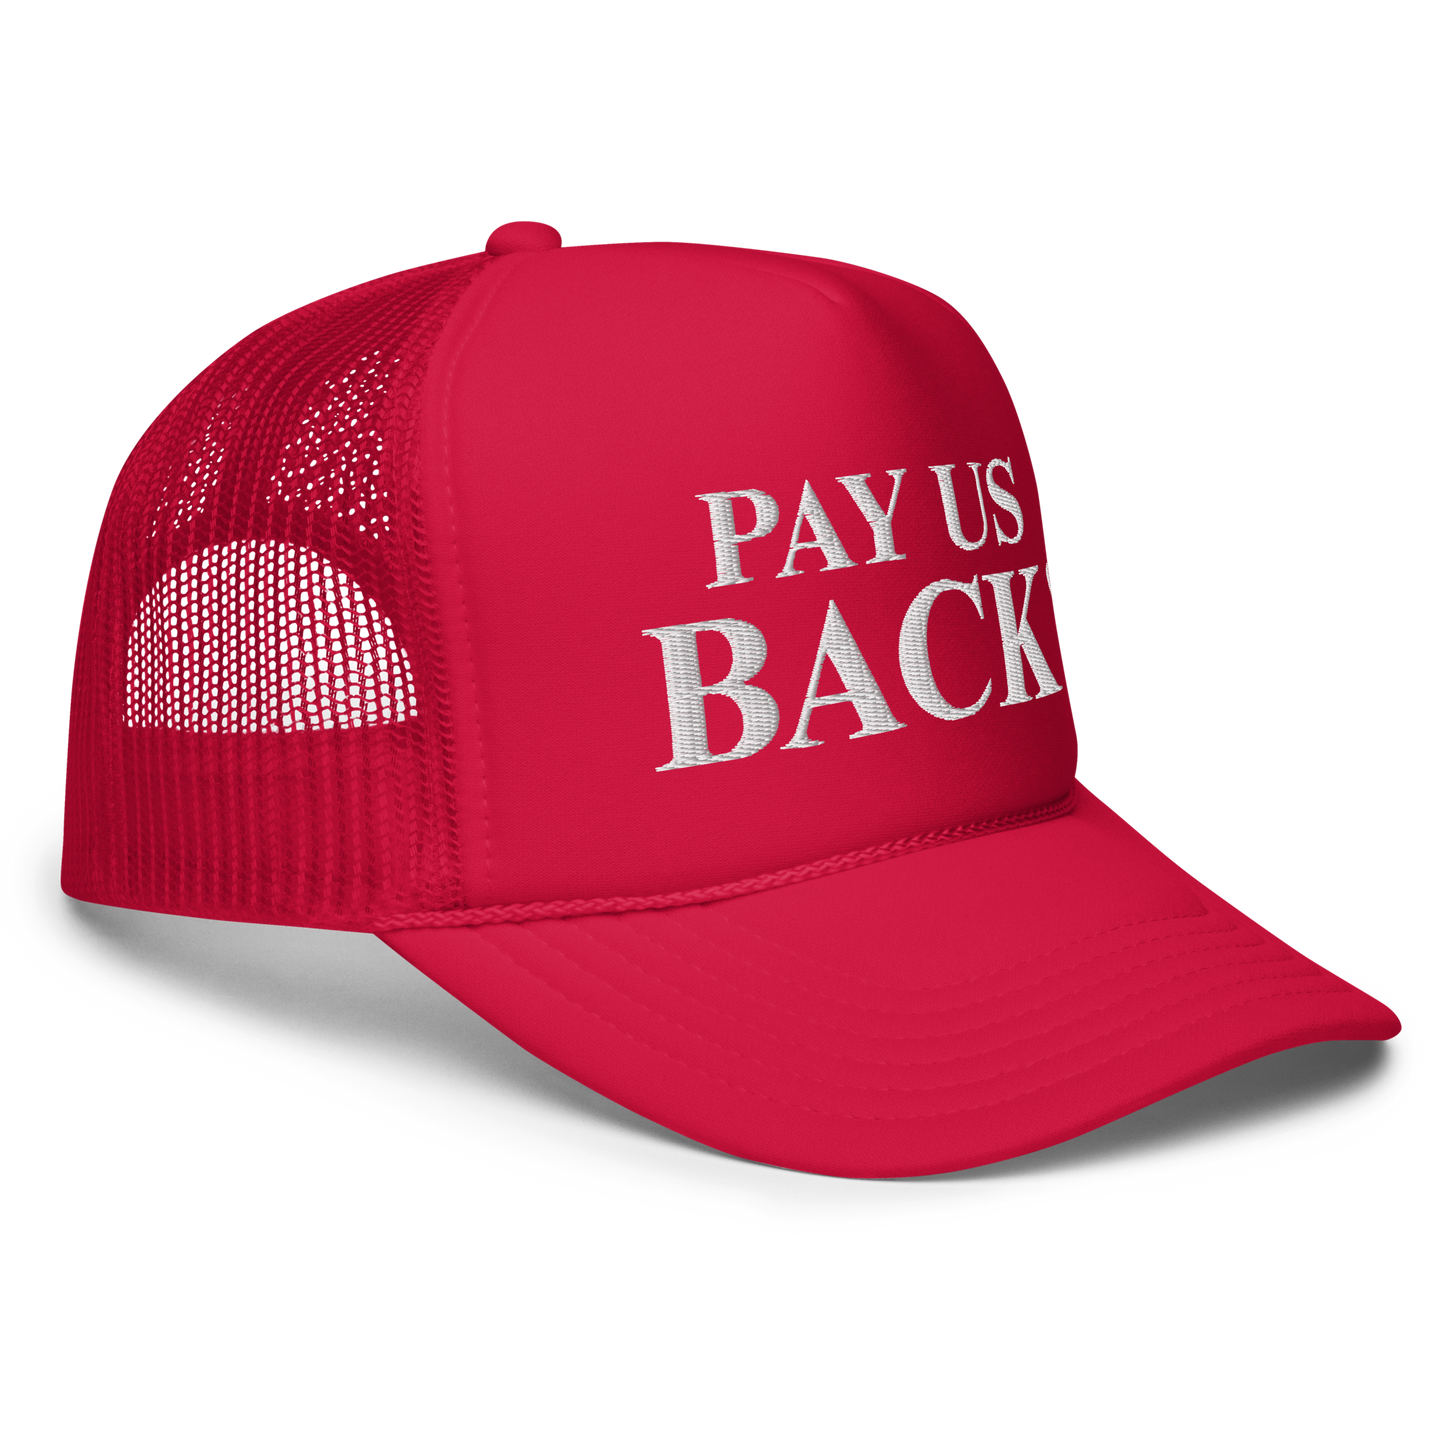 Pay Us Back! Student Loan Hat